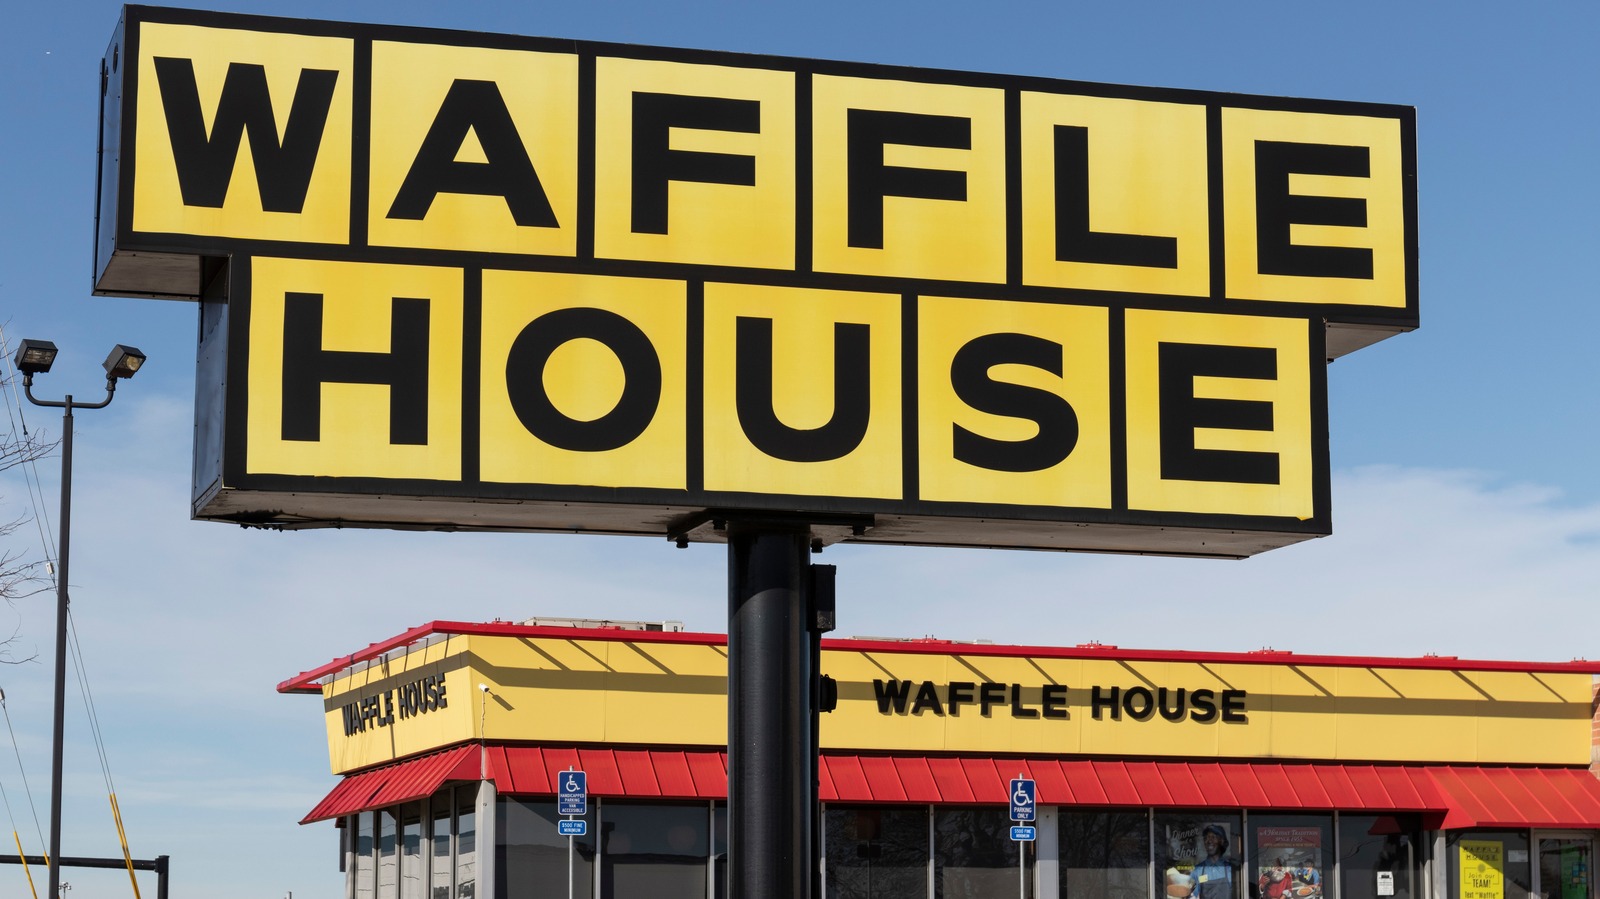 https://www.mashed.com/img/gallery/the-surprising-food-waffle-house-serves-more-than-any-other-restaurant-in-the-world/l-intro-1646265987.jpg